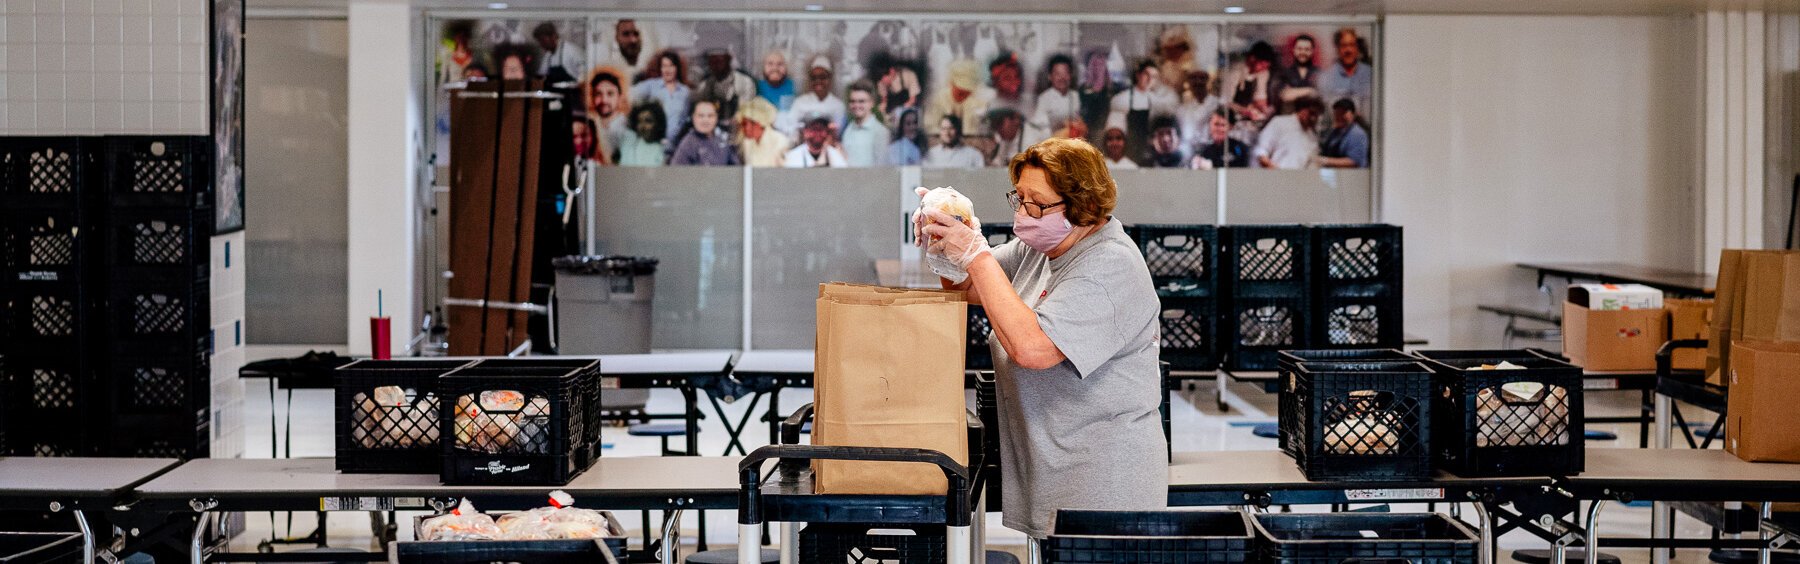 A Plymouth-Canton Community Schools staffer prepares meals for pickup.